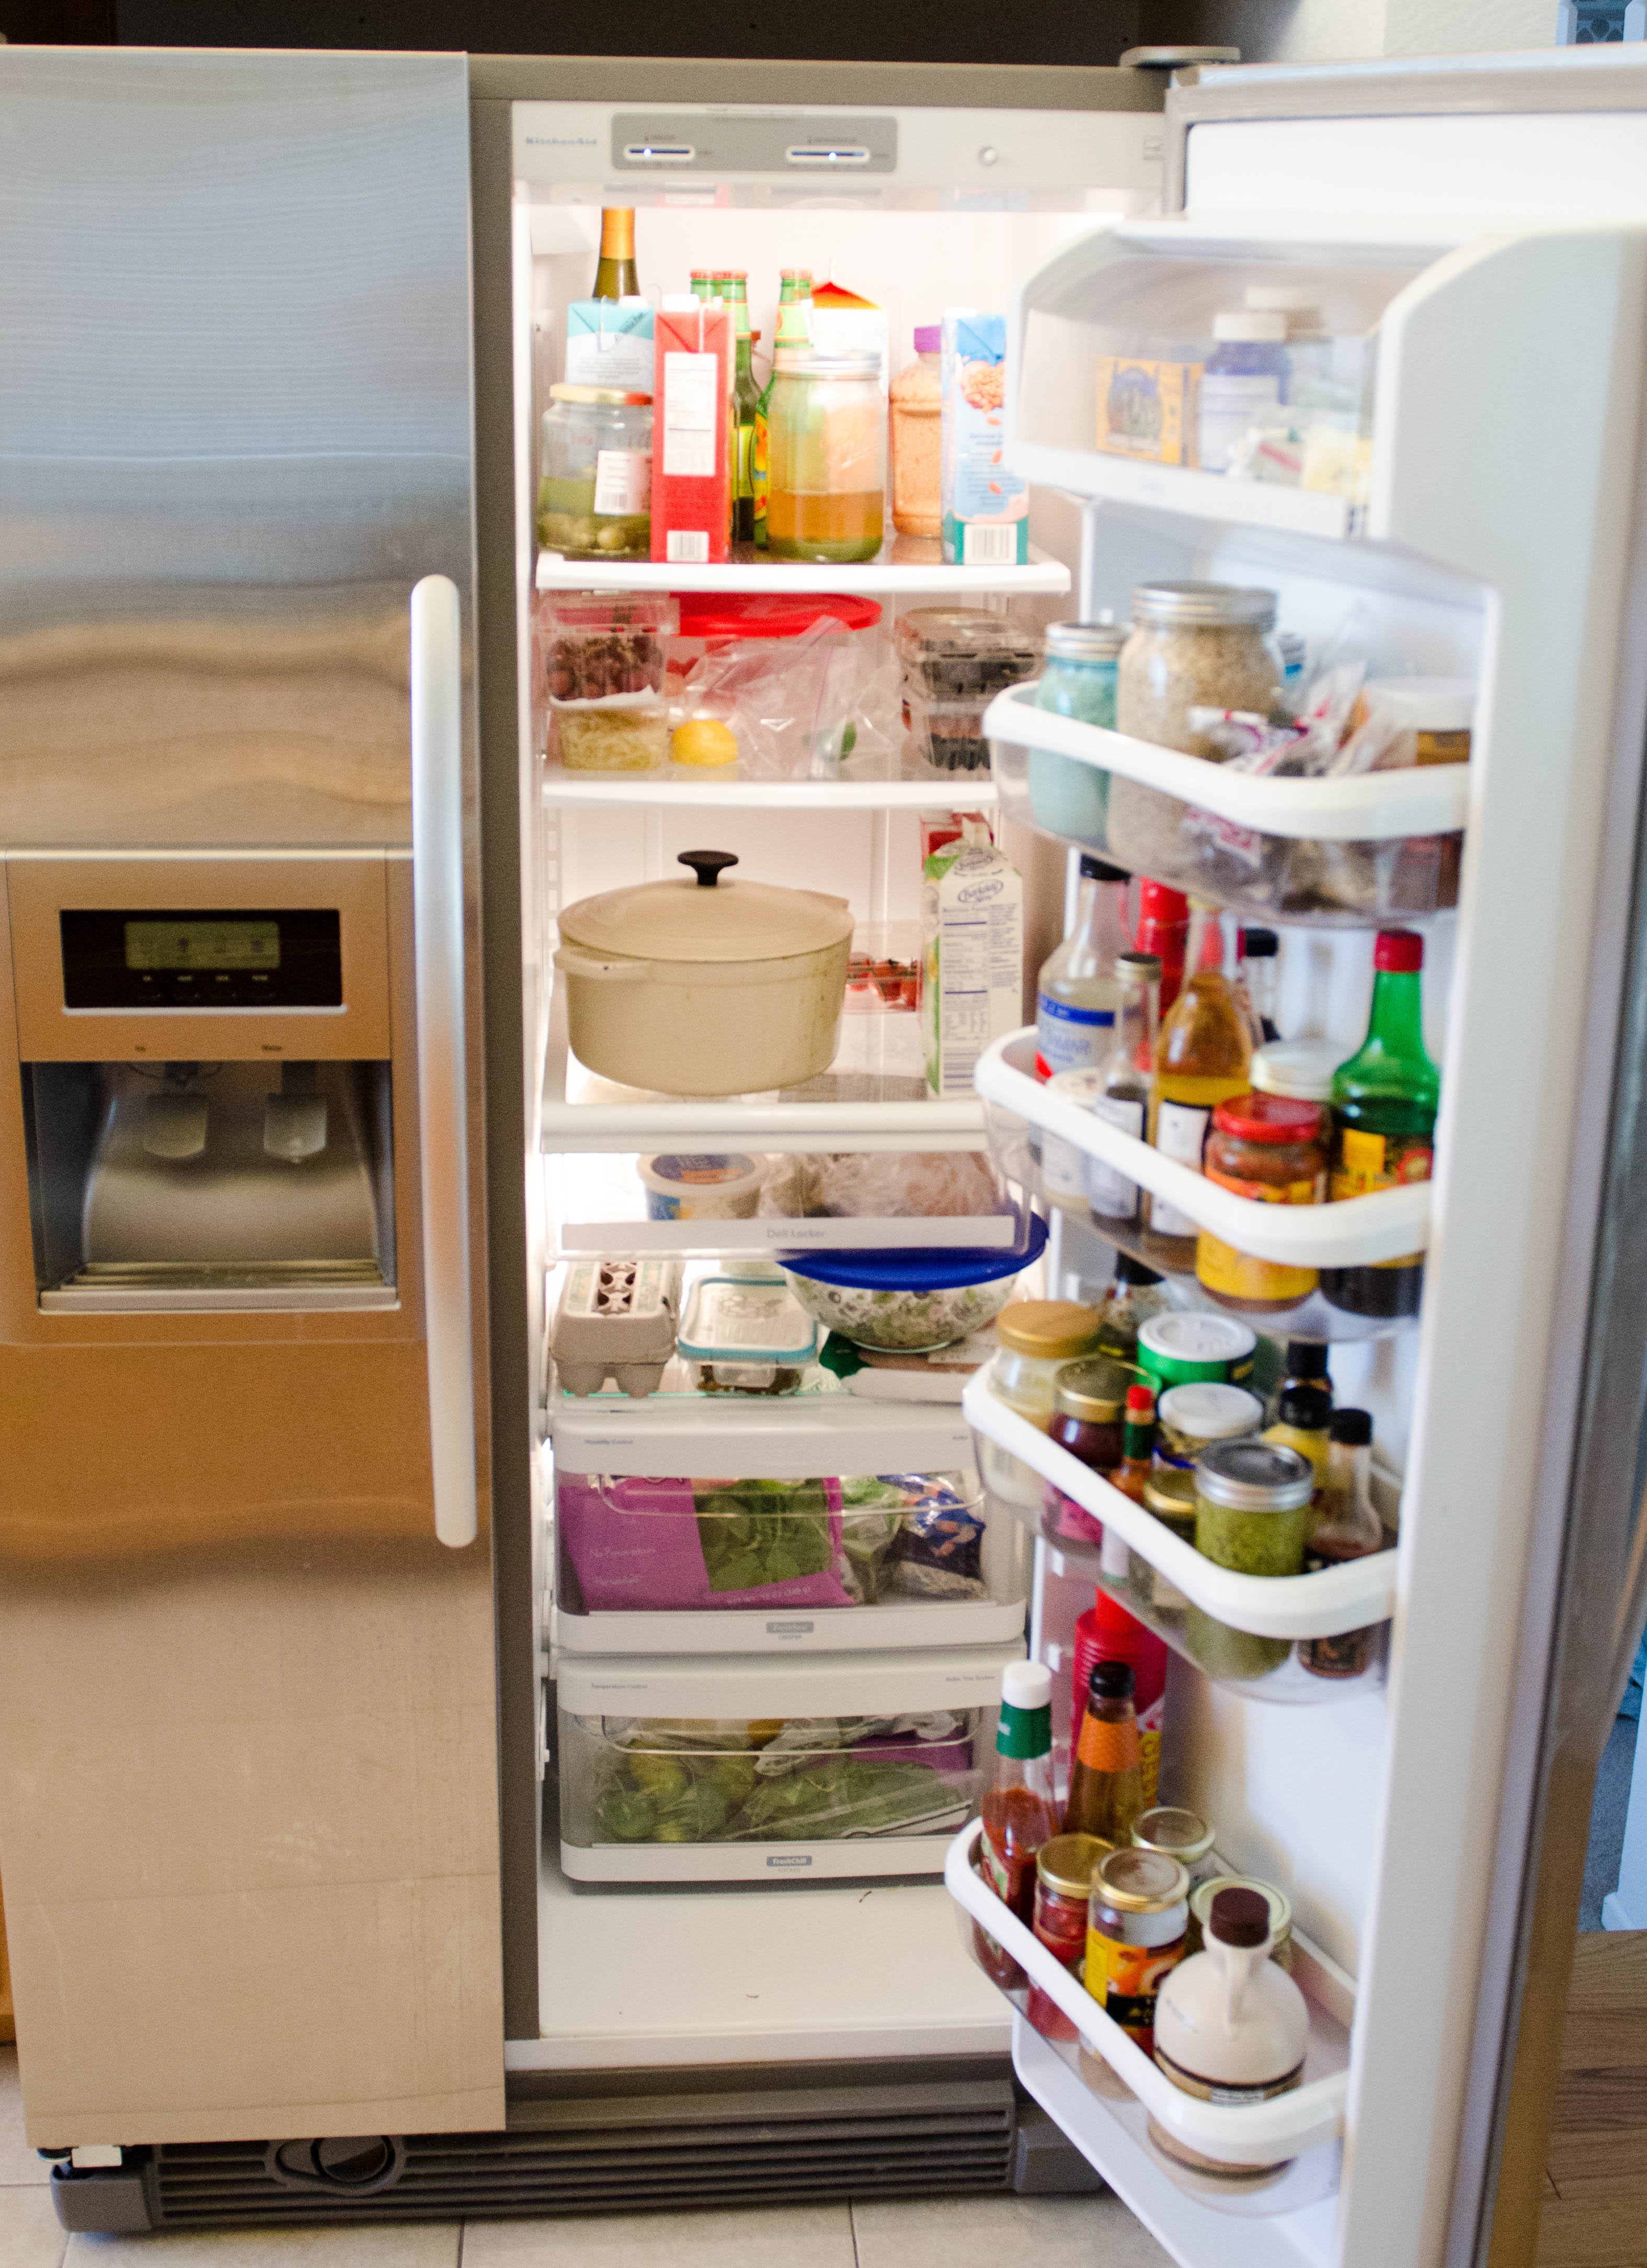 How to Tell if Your Freezer Power Was Off When You Were Away